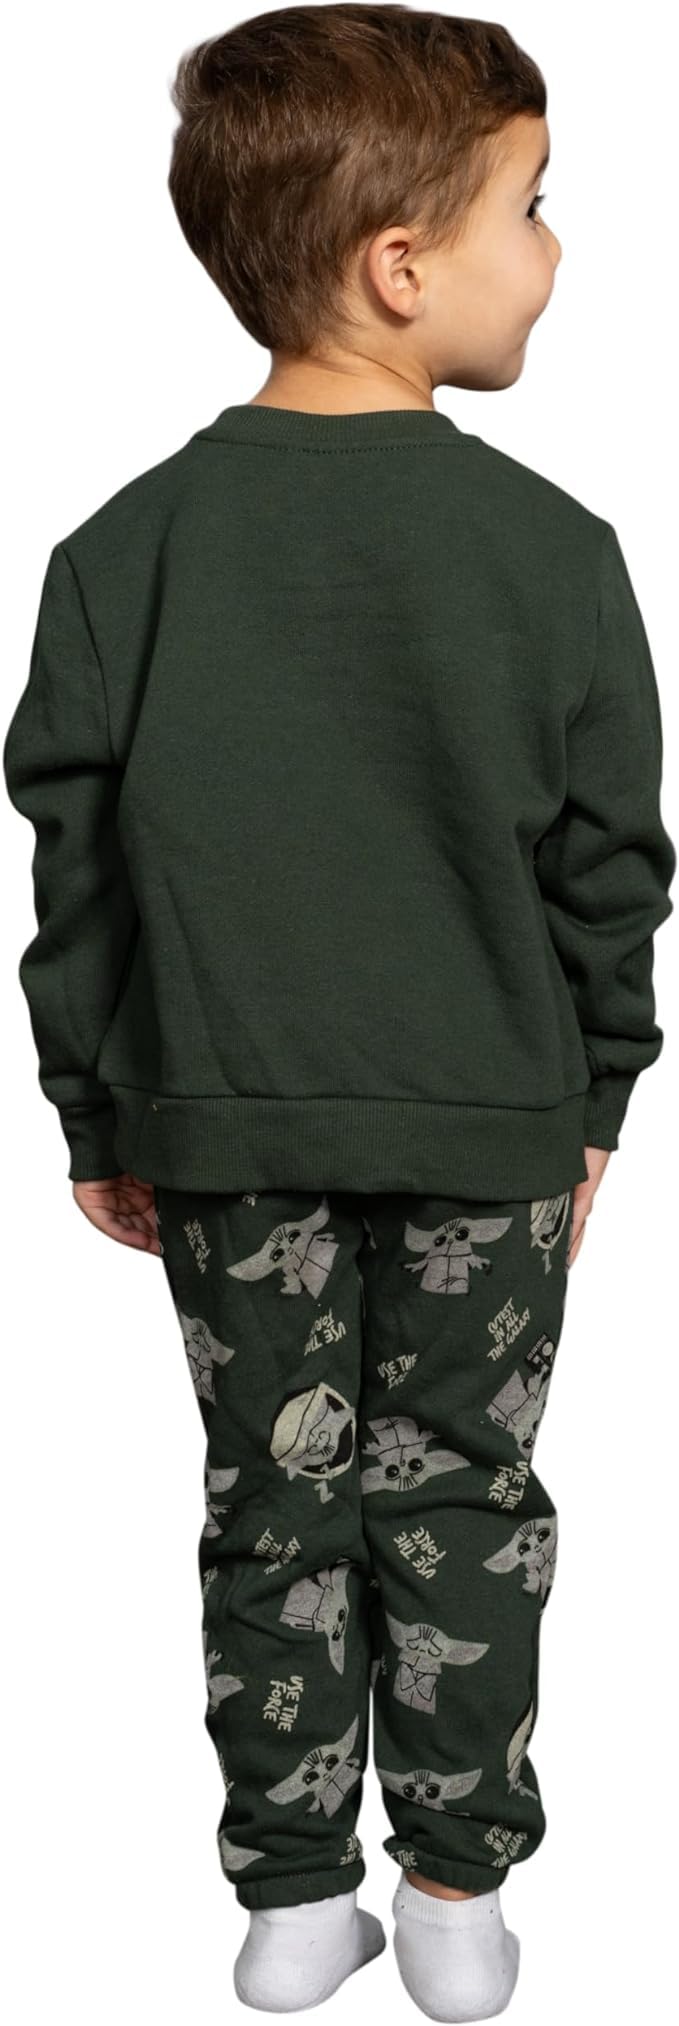 Star Wars Yoda Grogu The Cuteness is Strong in This One Green Sweatshirt and Pants Set